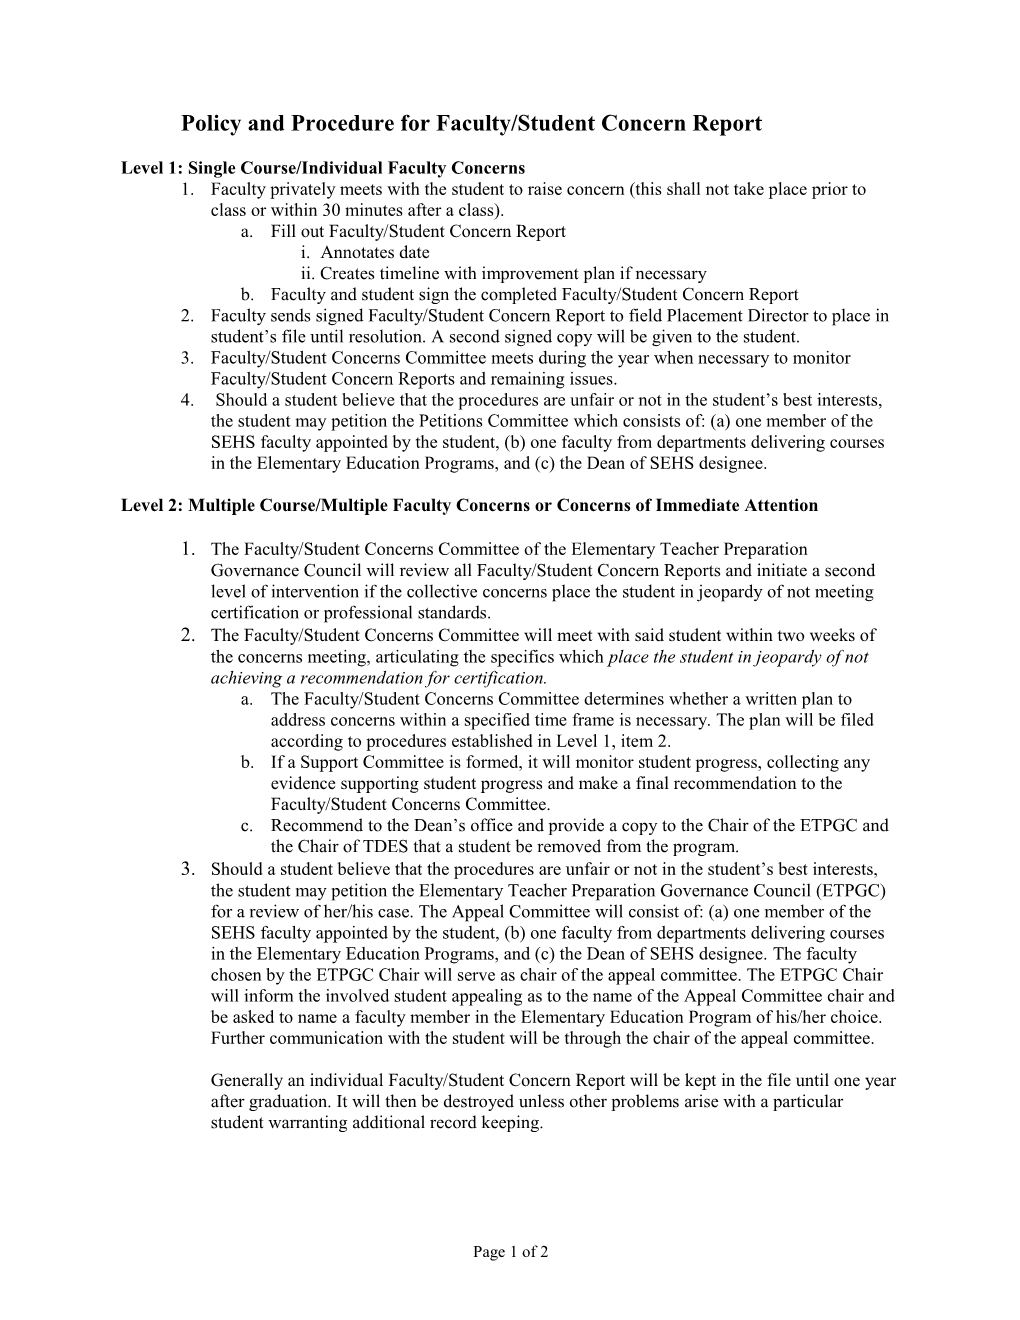 Policy and Procedure for Faculty/Student Concern Report